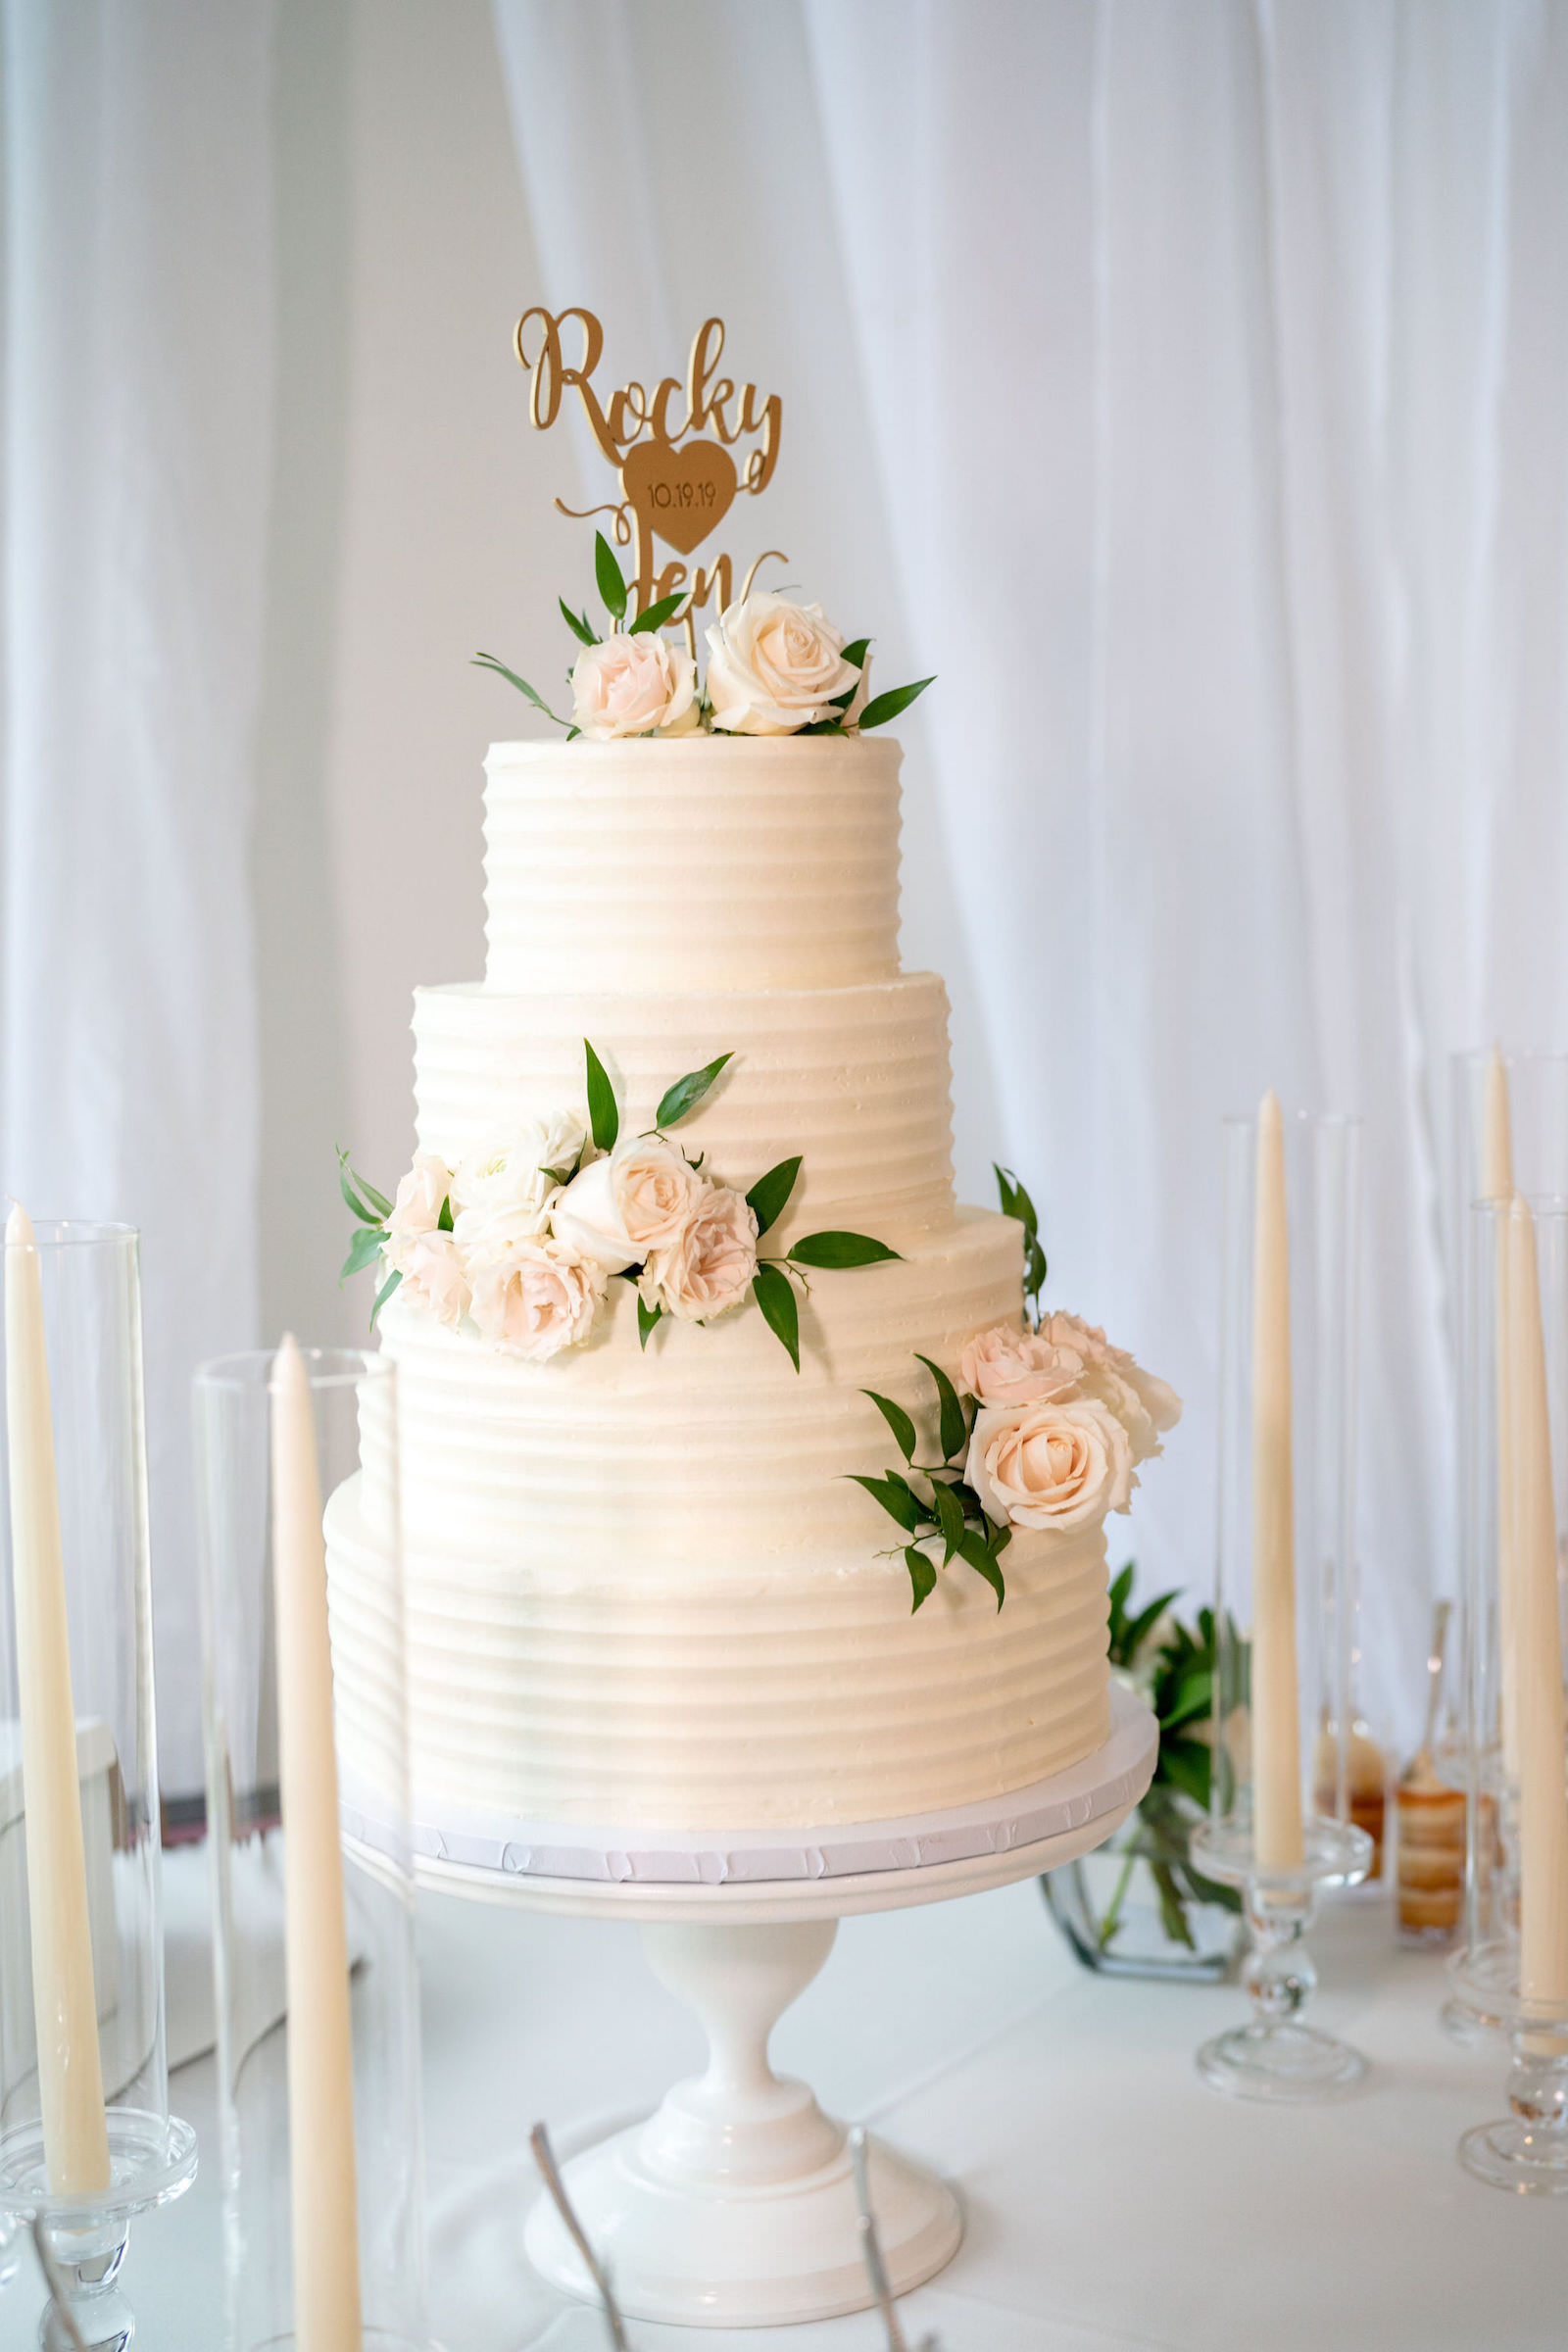 Four Tier Wedding Cake with Ribbed Textured Buttercream Icing and Fresh Flowers Accents of Roses and Greenery with Gold Die Cut Names Cake Topper | Wedding Cake Table with White Round Pedestal Cake Stand and Taper Candles